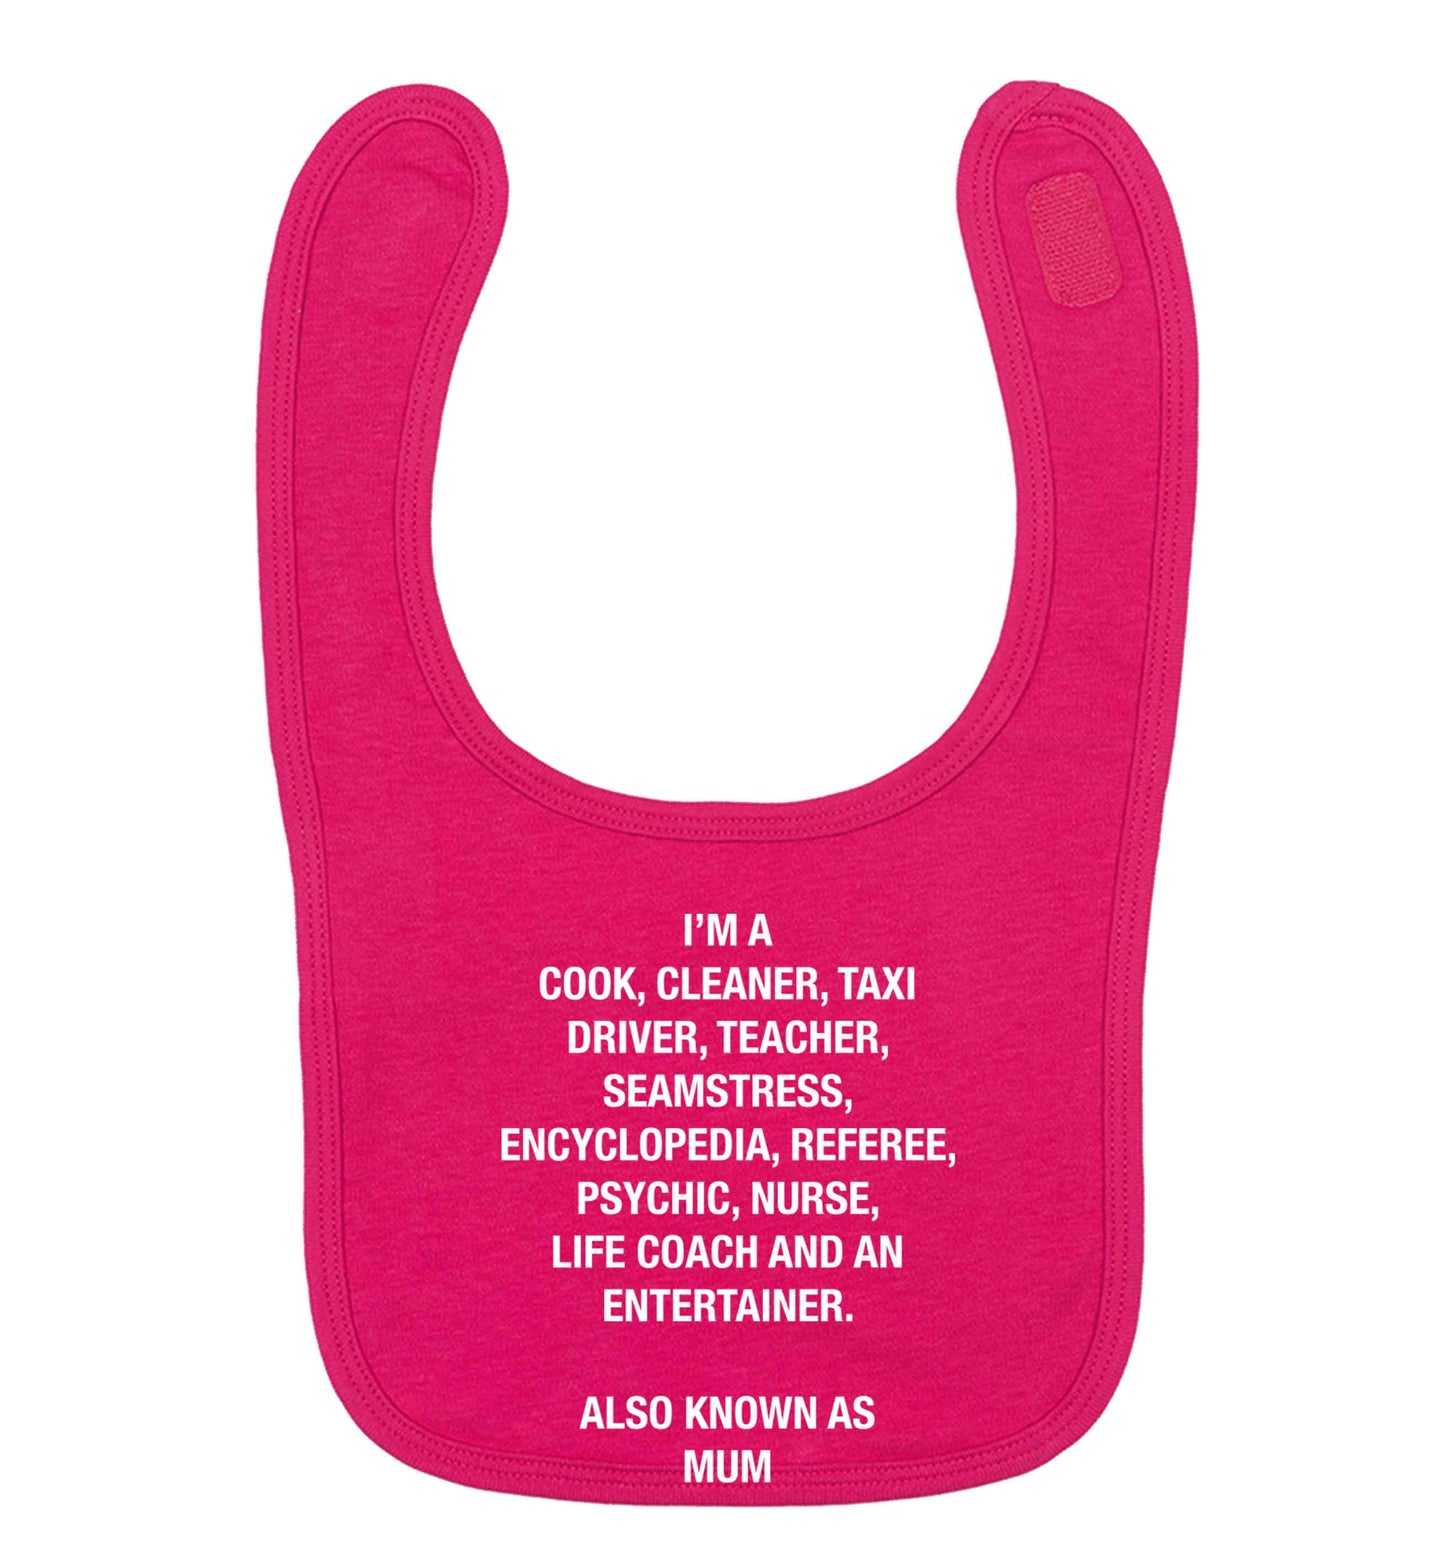 Funny gifts for your mum on mother's dayor her birthday! Mum, cook, cleaner, taxi driver, teacher, seamstress, encyclopedia, referee, psychic, nurse, life coach and entertainer dark pink baby bib